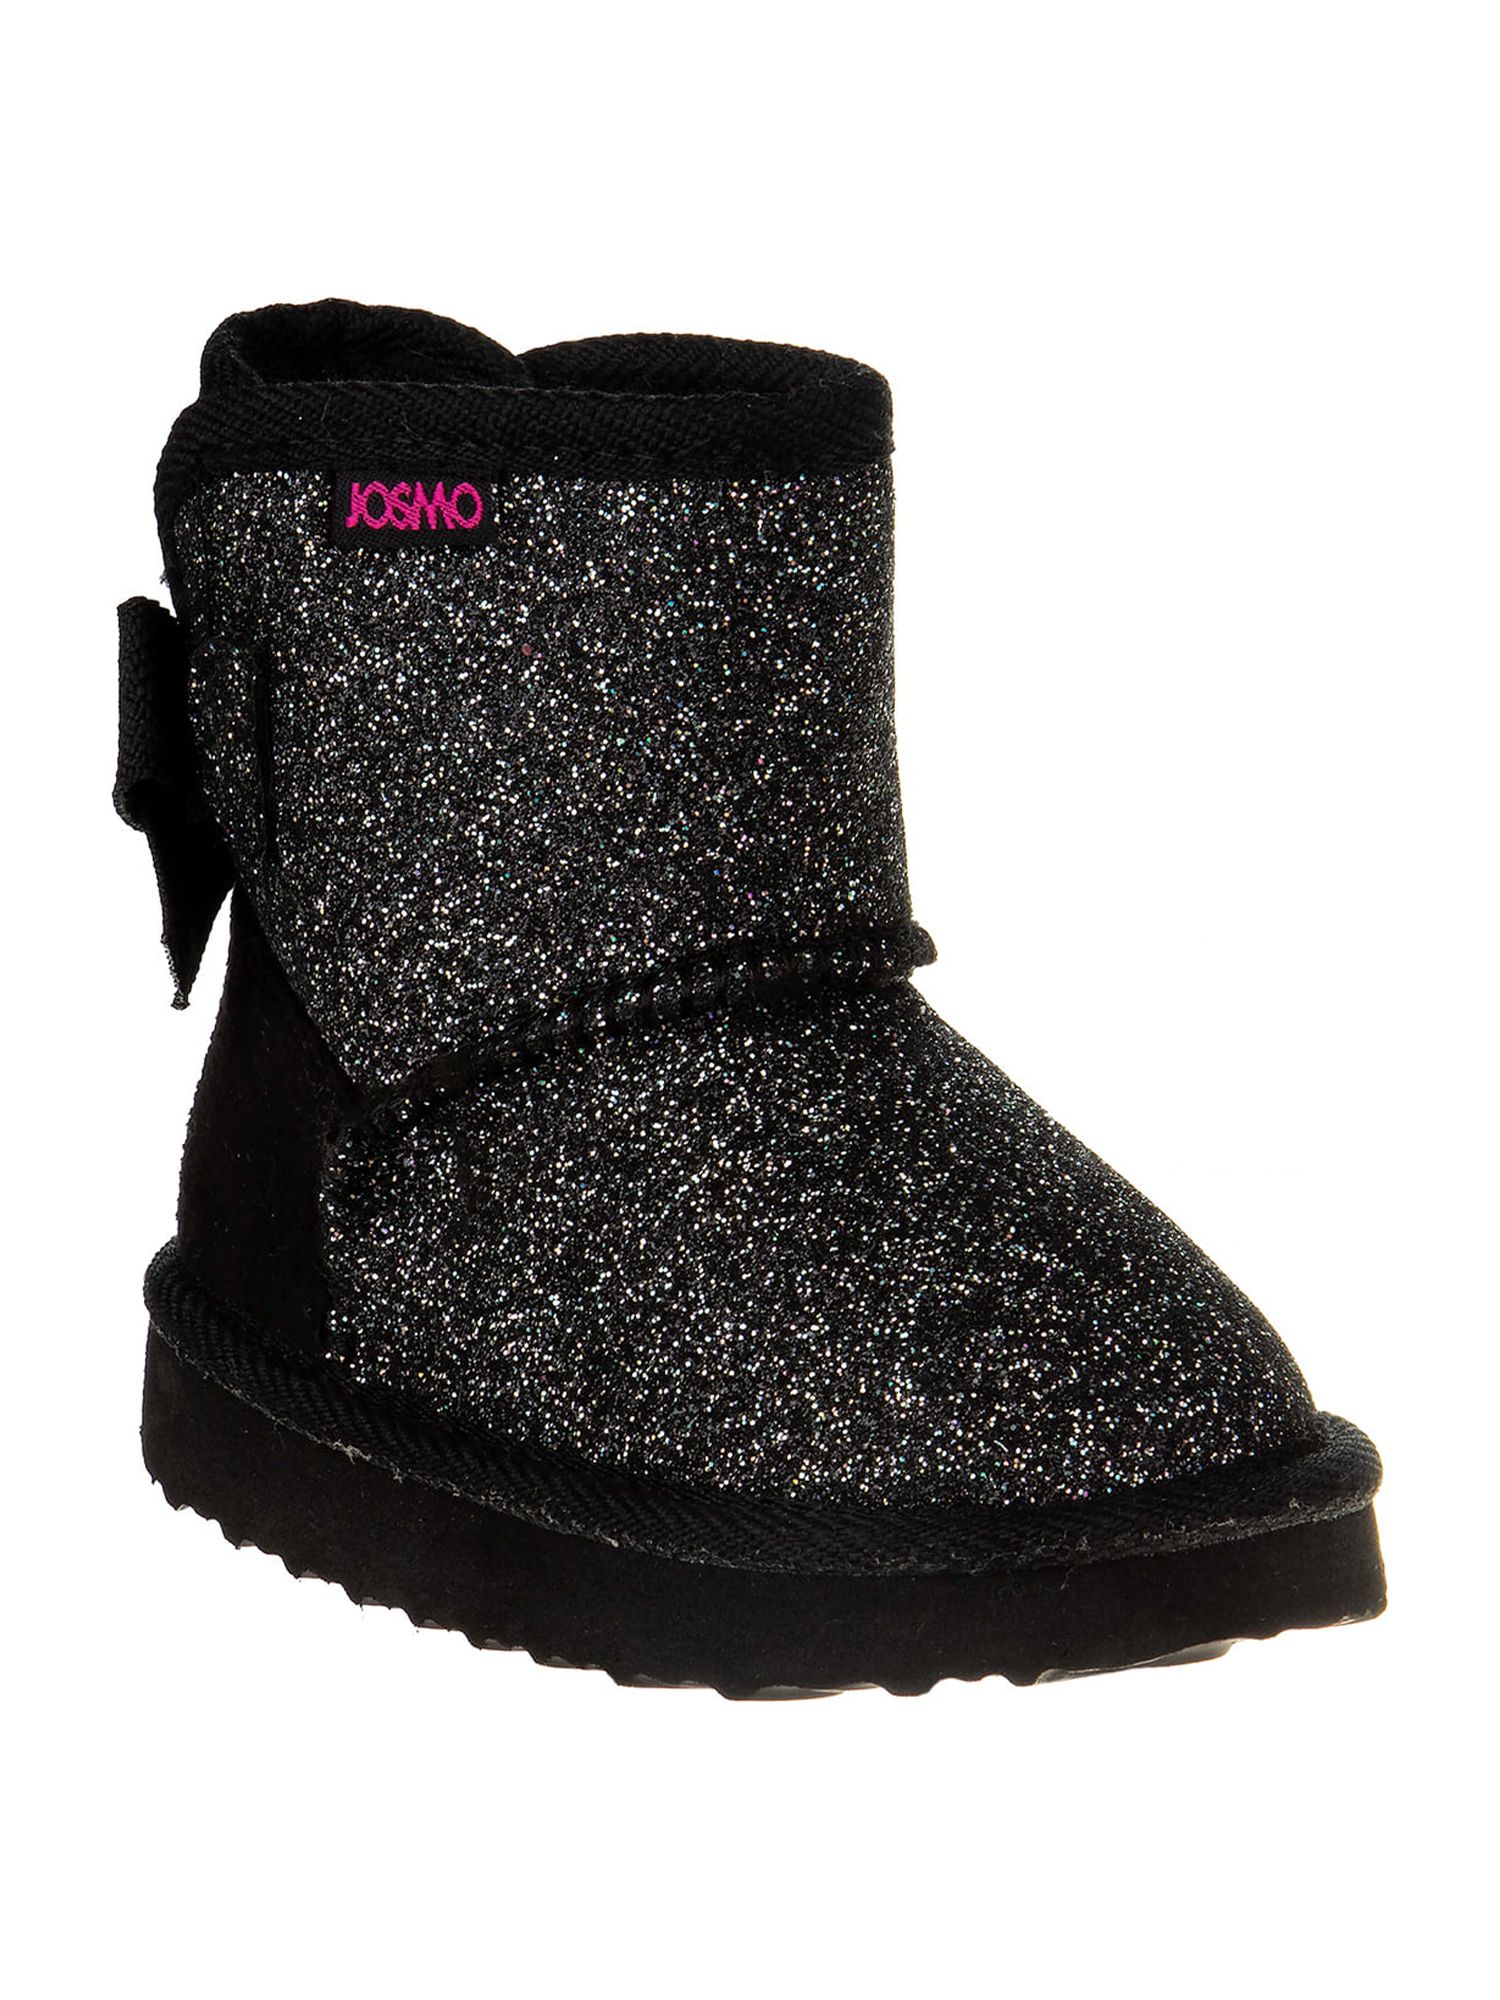 Josmo Glitter & Bows Faux Shearling Ankle Boot (Toddler Girls) - image 1 of 5